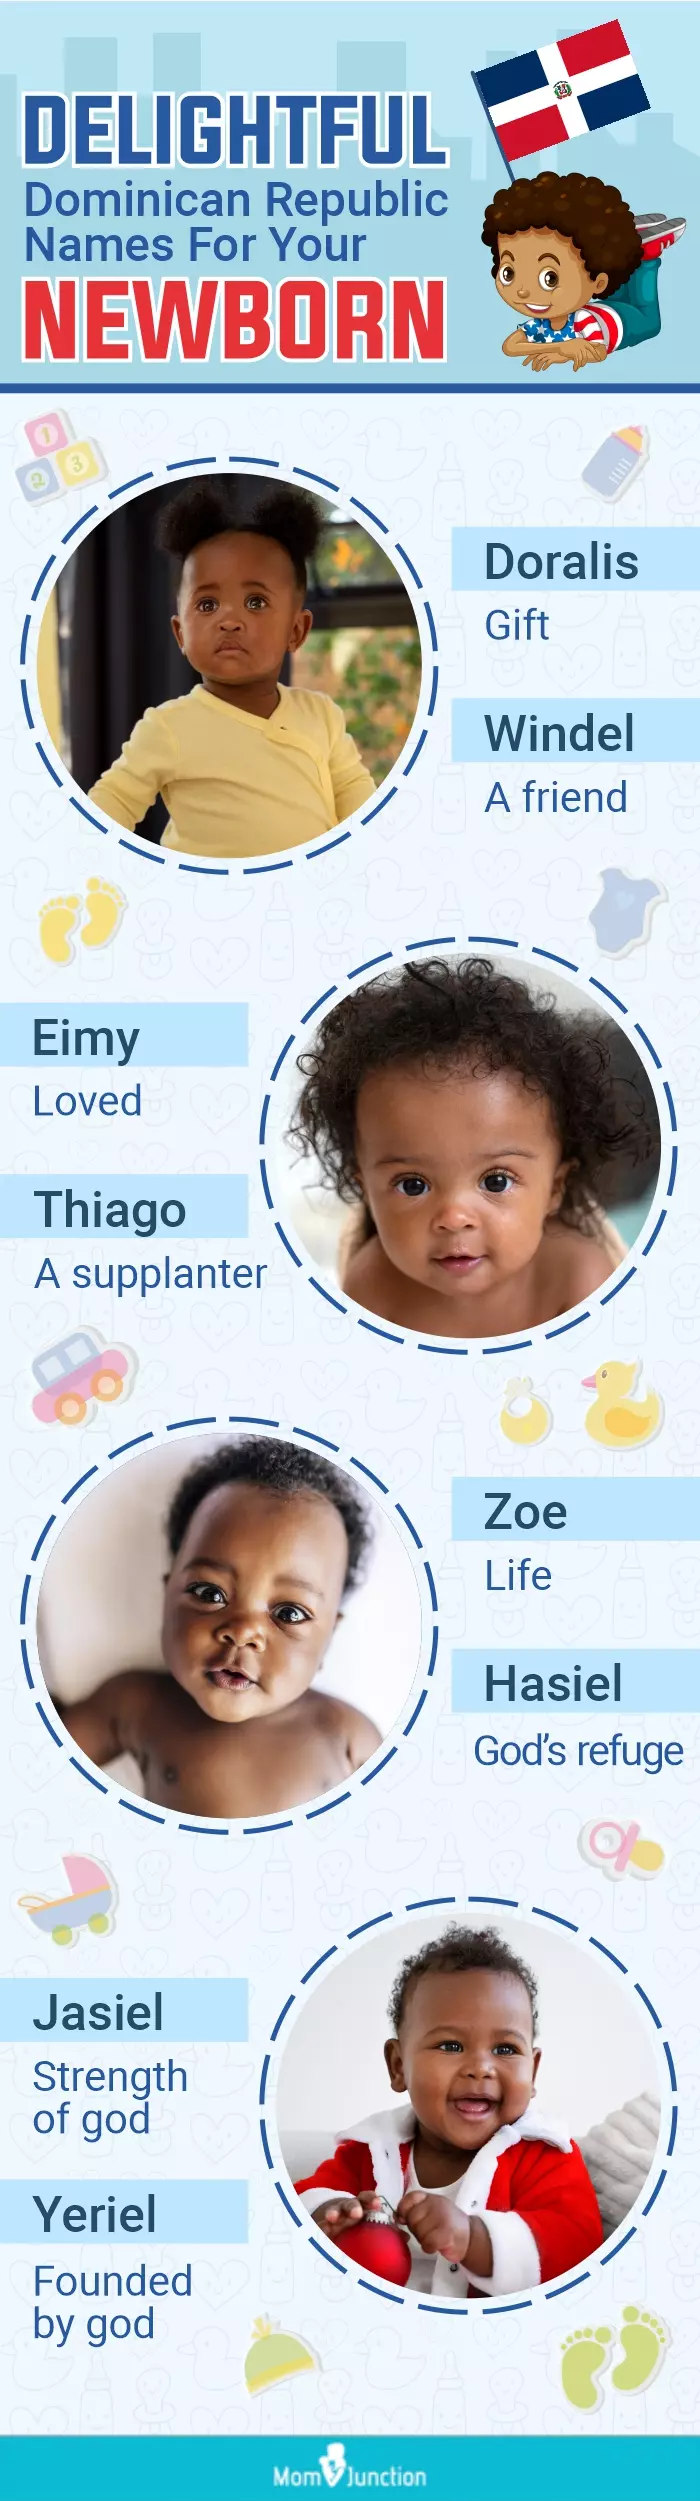 delightful dominican republic names for your newborn (infographic)